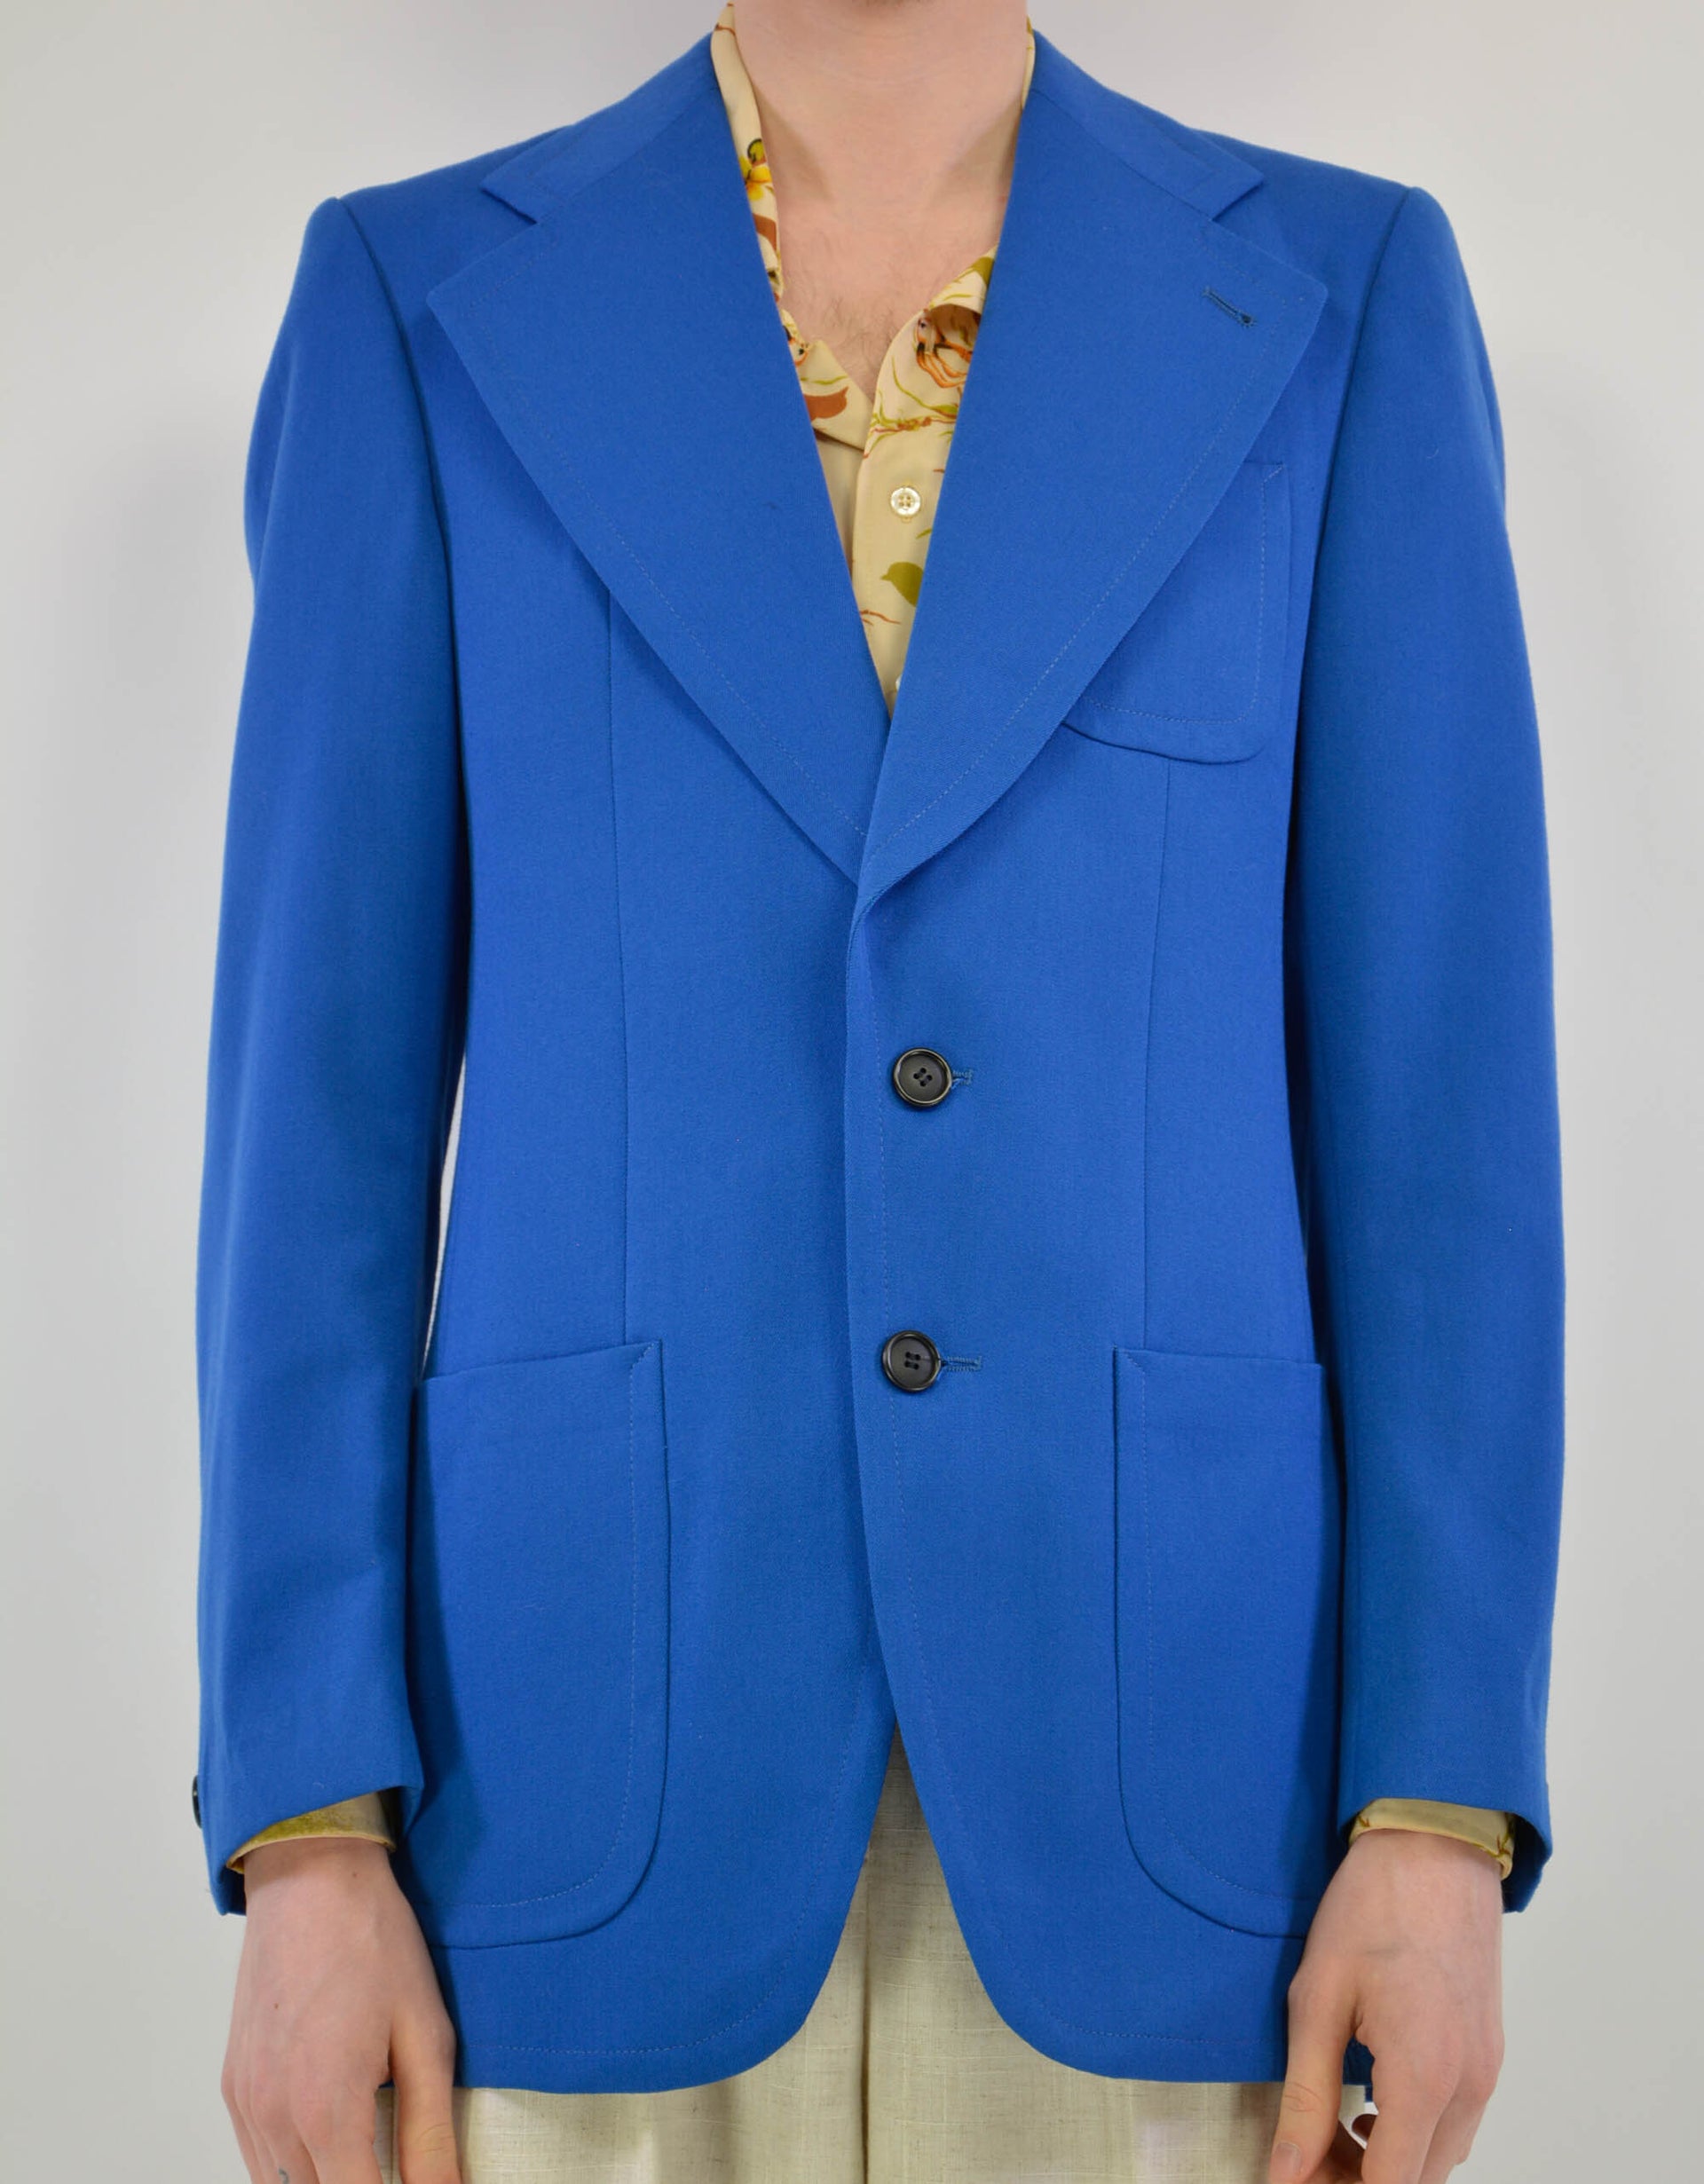 80s blue suit jacket • PICKNWEIGHT